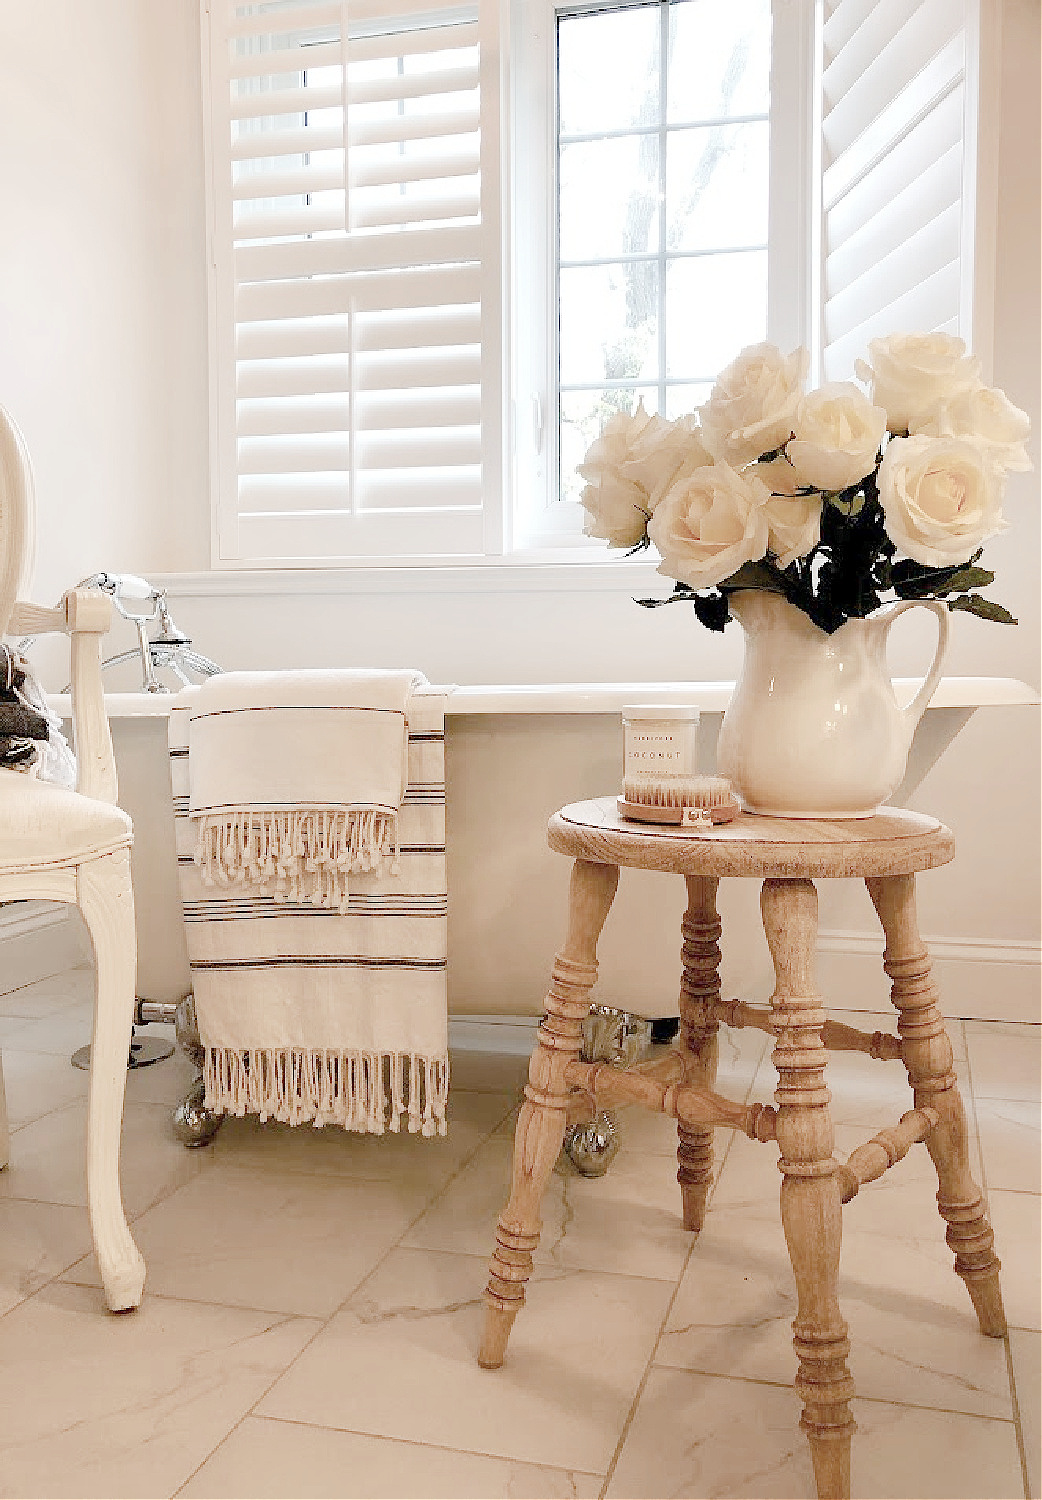 Modern French white bathroom with maid's tub, farmhous estool, white ironstone pitcher with roses, and plantation shutters - Hello Lovely Studio.